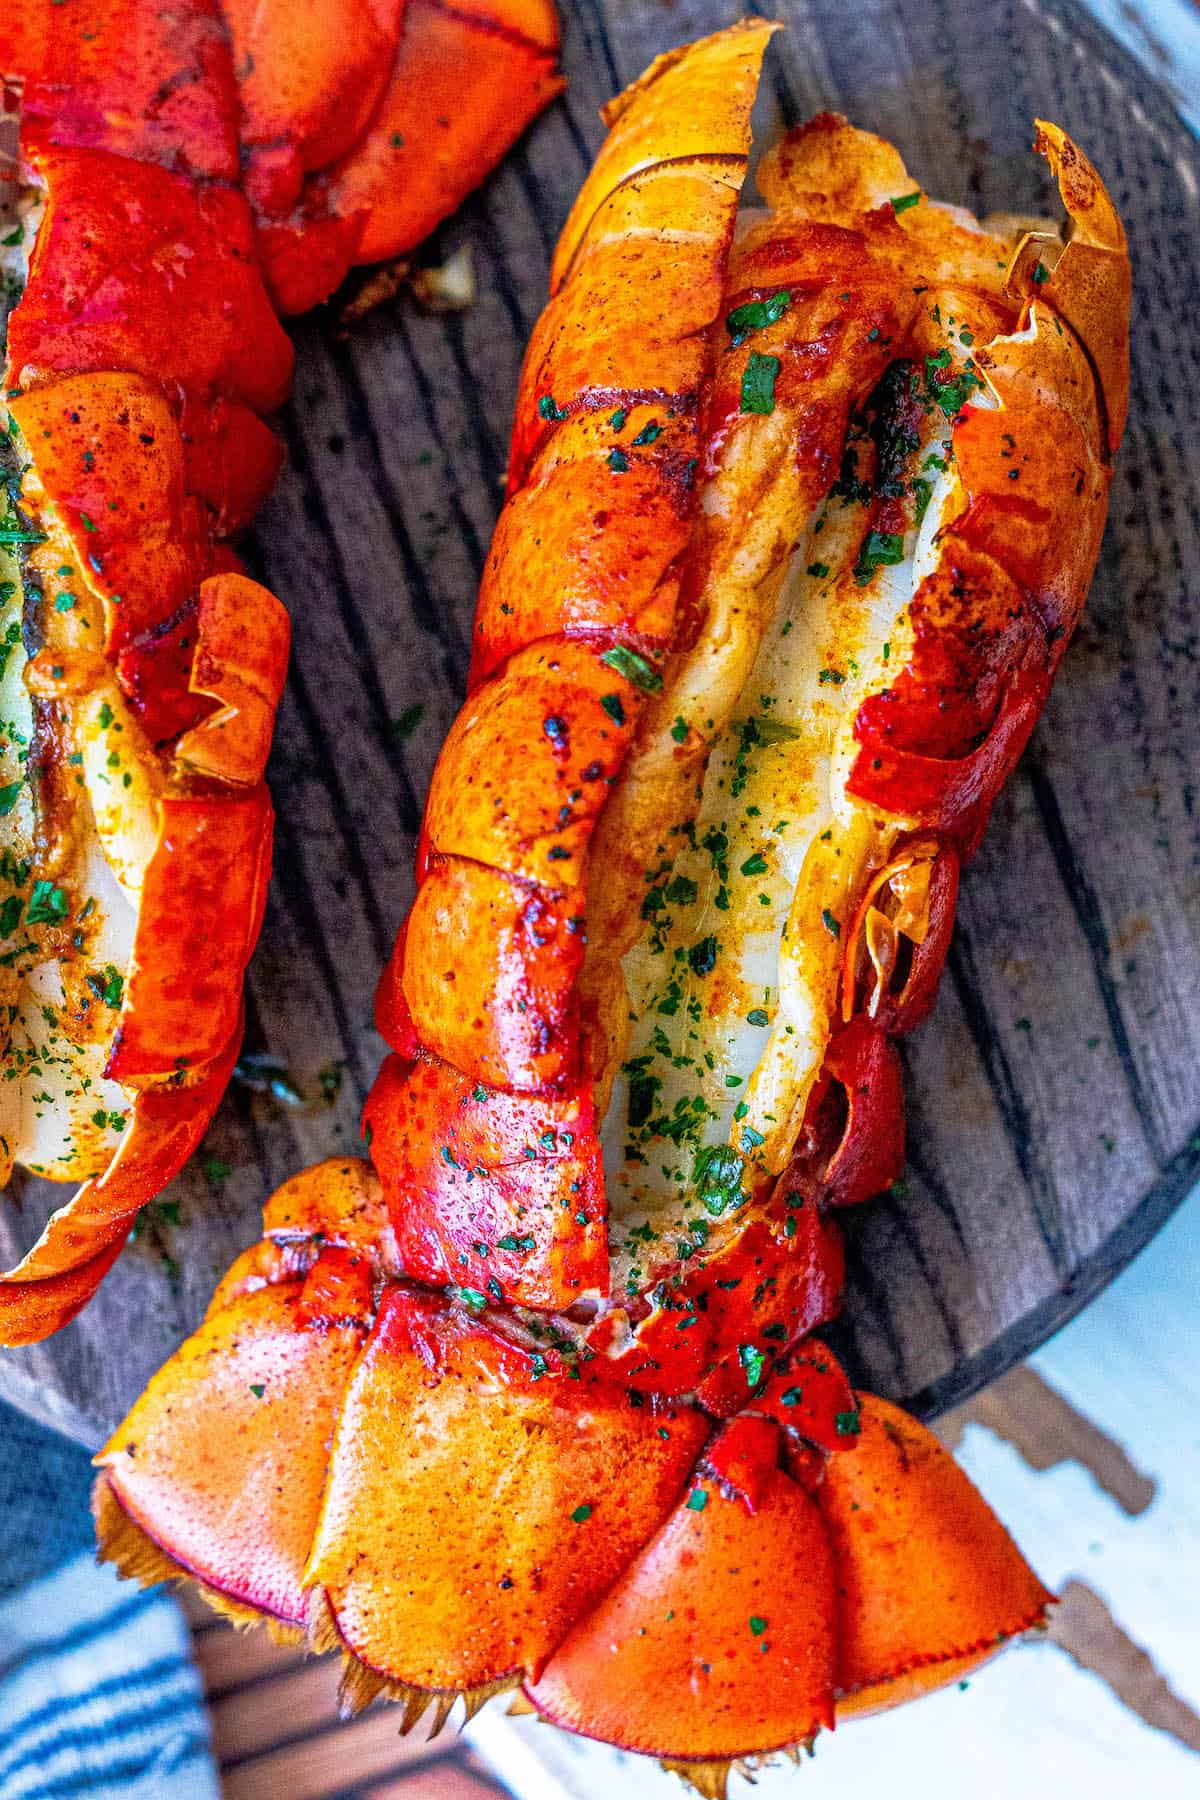 Two broiled lobster tails on a wooden board.